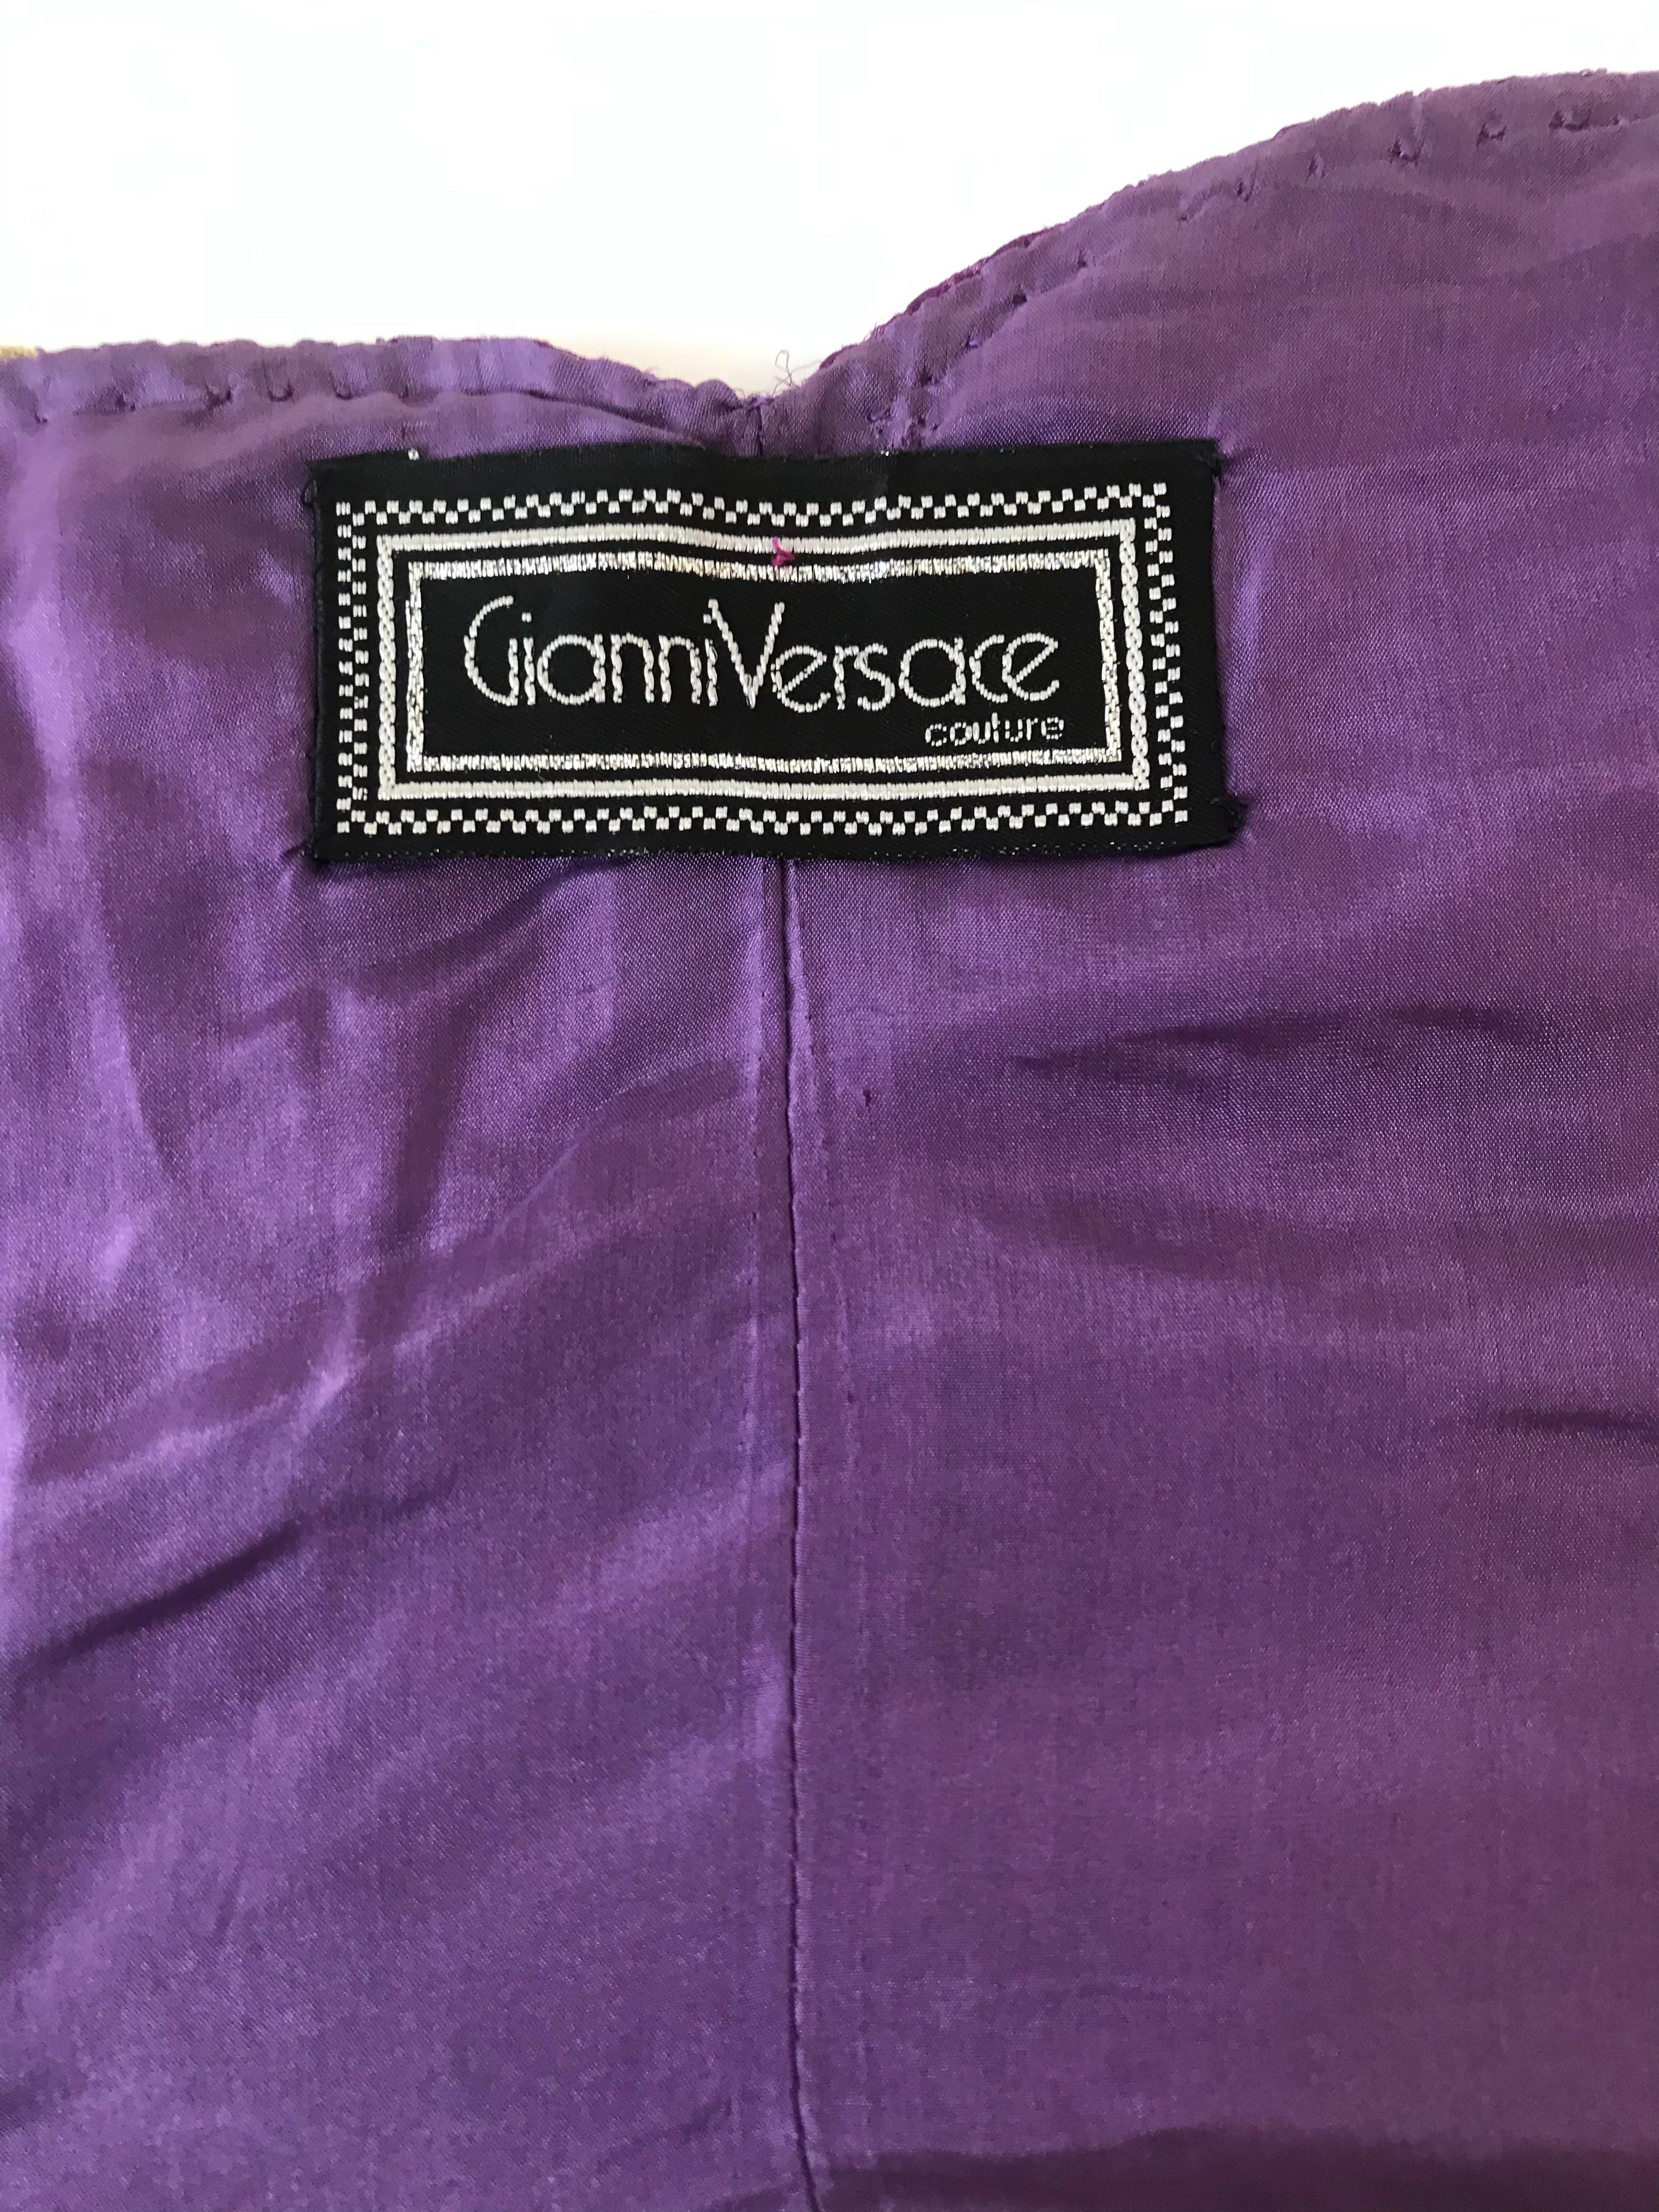 Gianni Versace Couture Purple & Gold Embellished & Embroidered Bustier/Corset For Sale 4